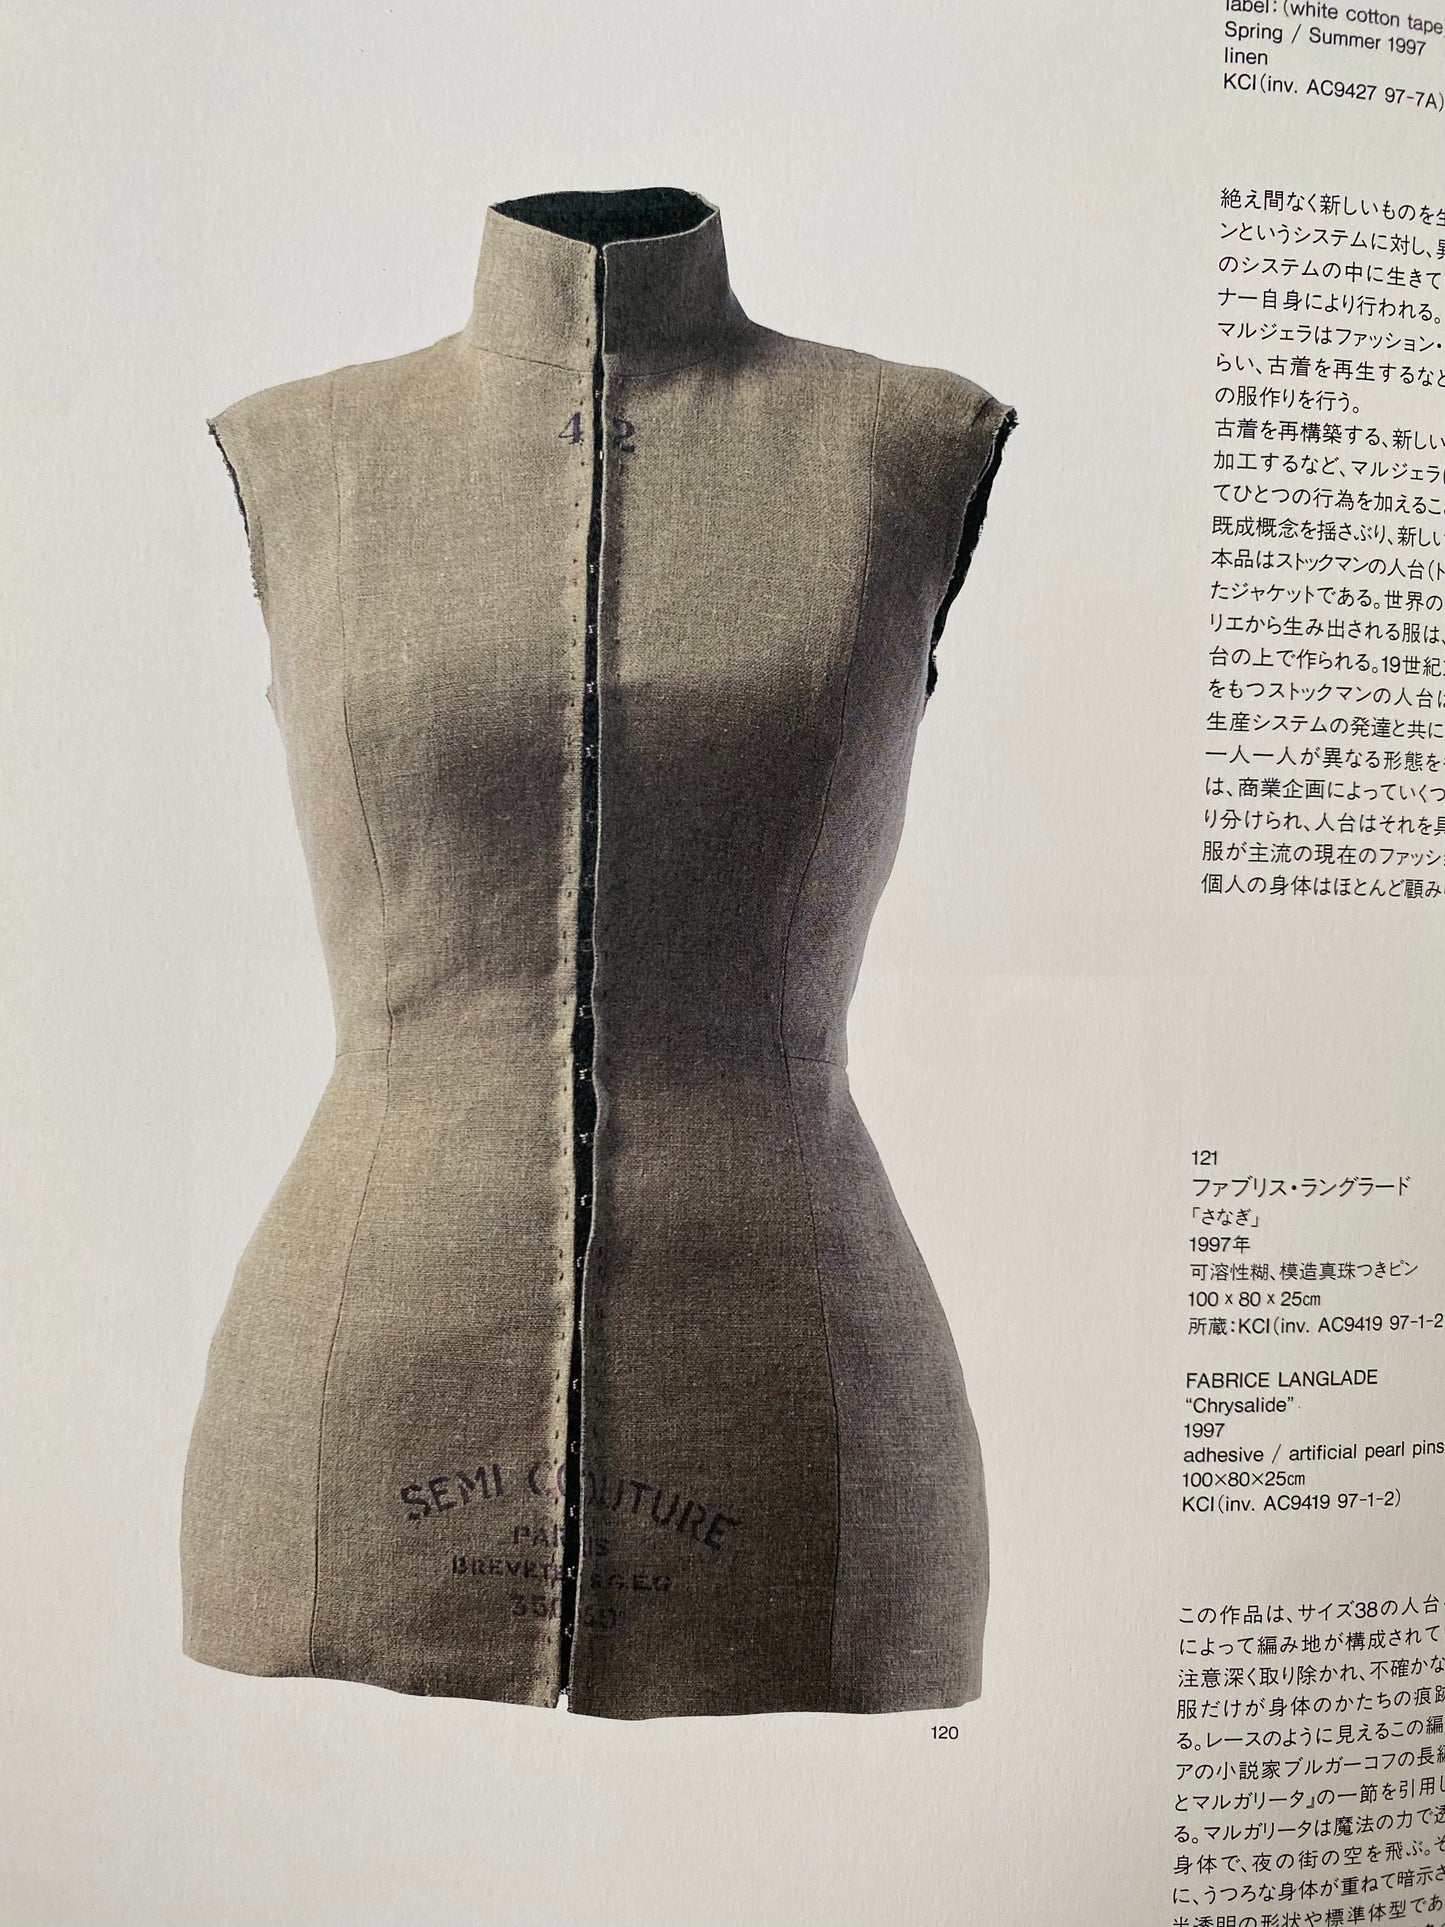 Visions Of The Body: Fashion Or Invisible Corset (1999)